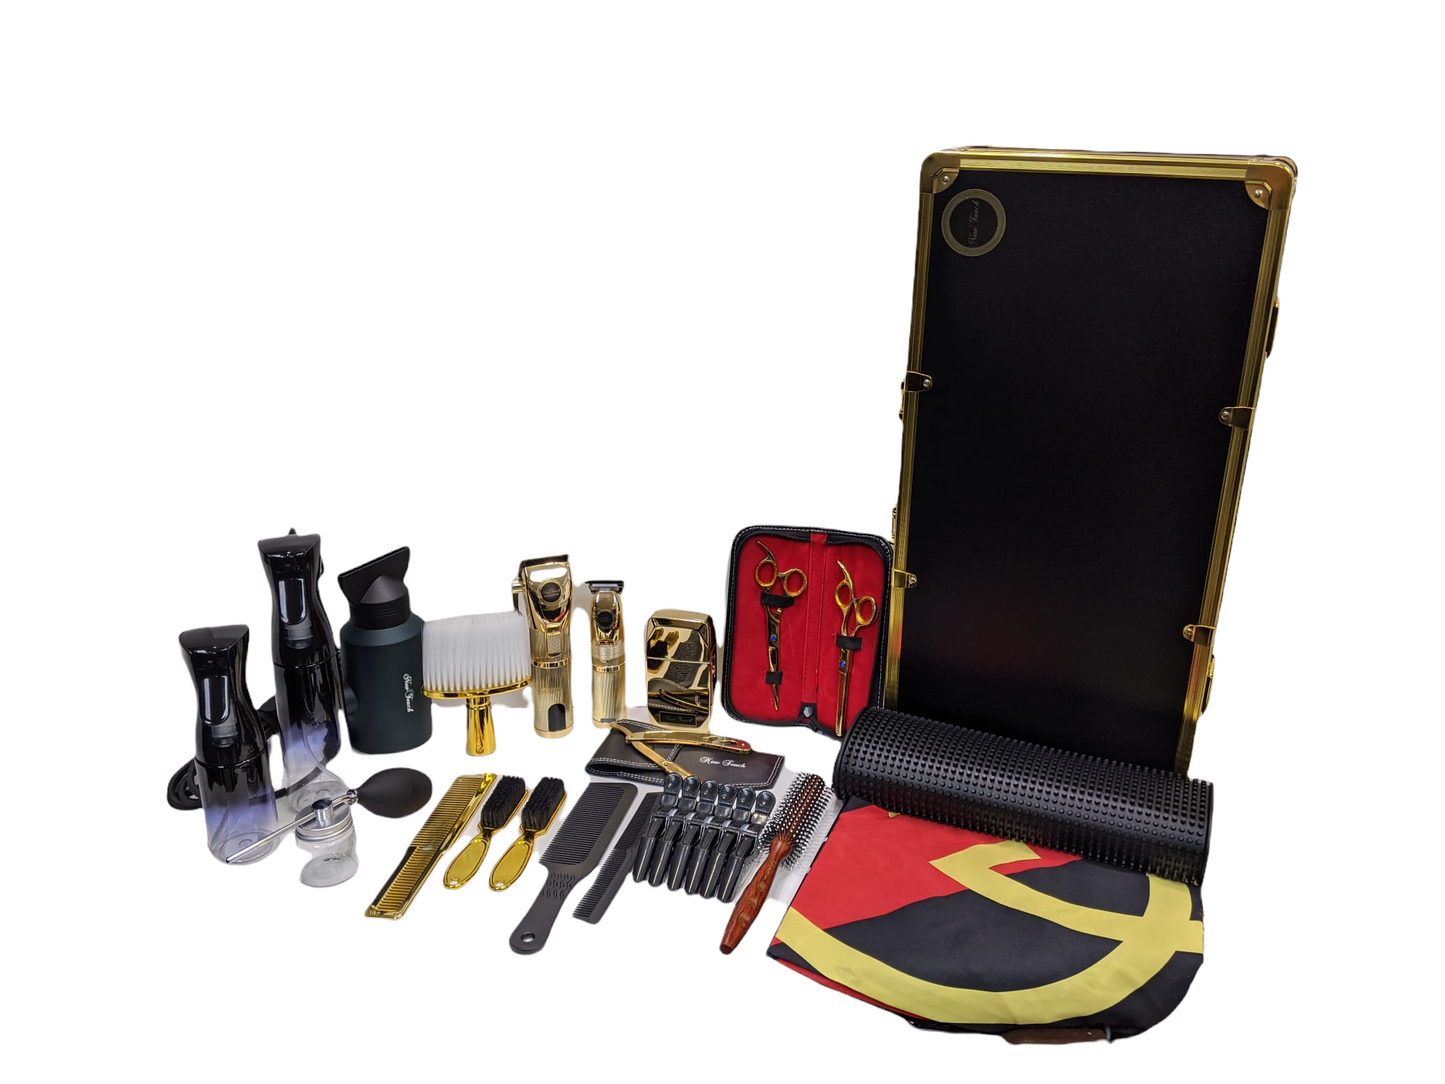 New Touch Ultimate professional barber Kit